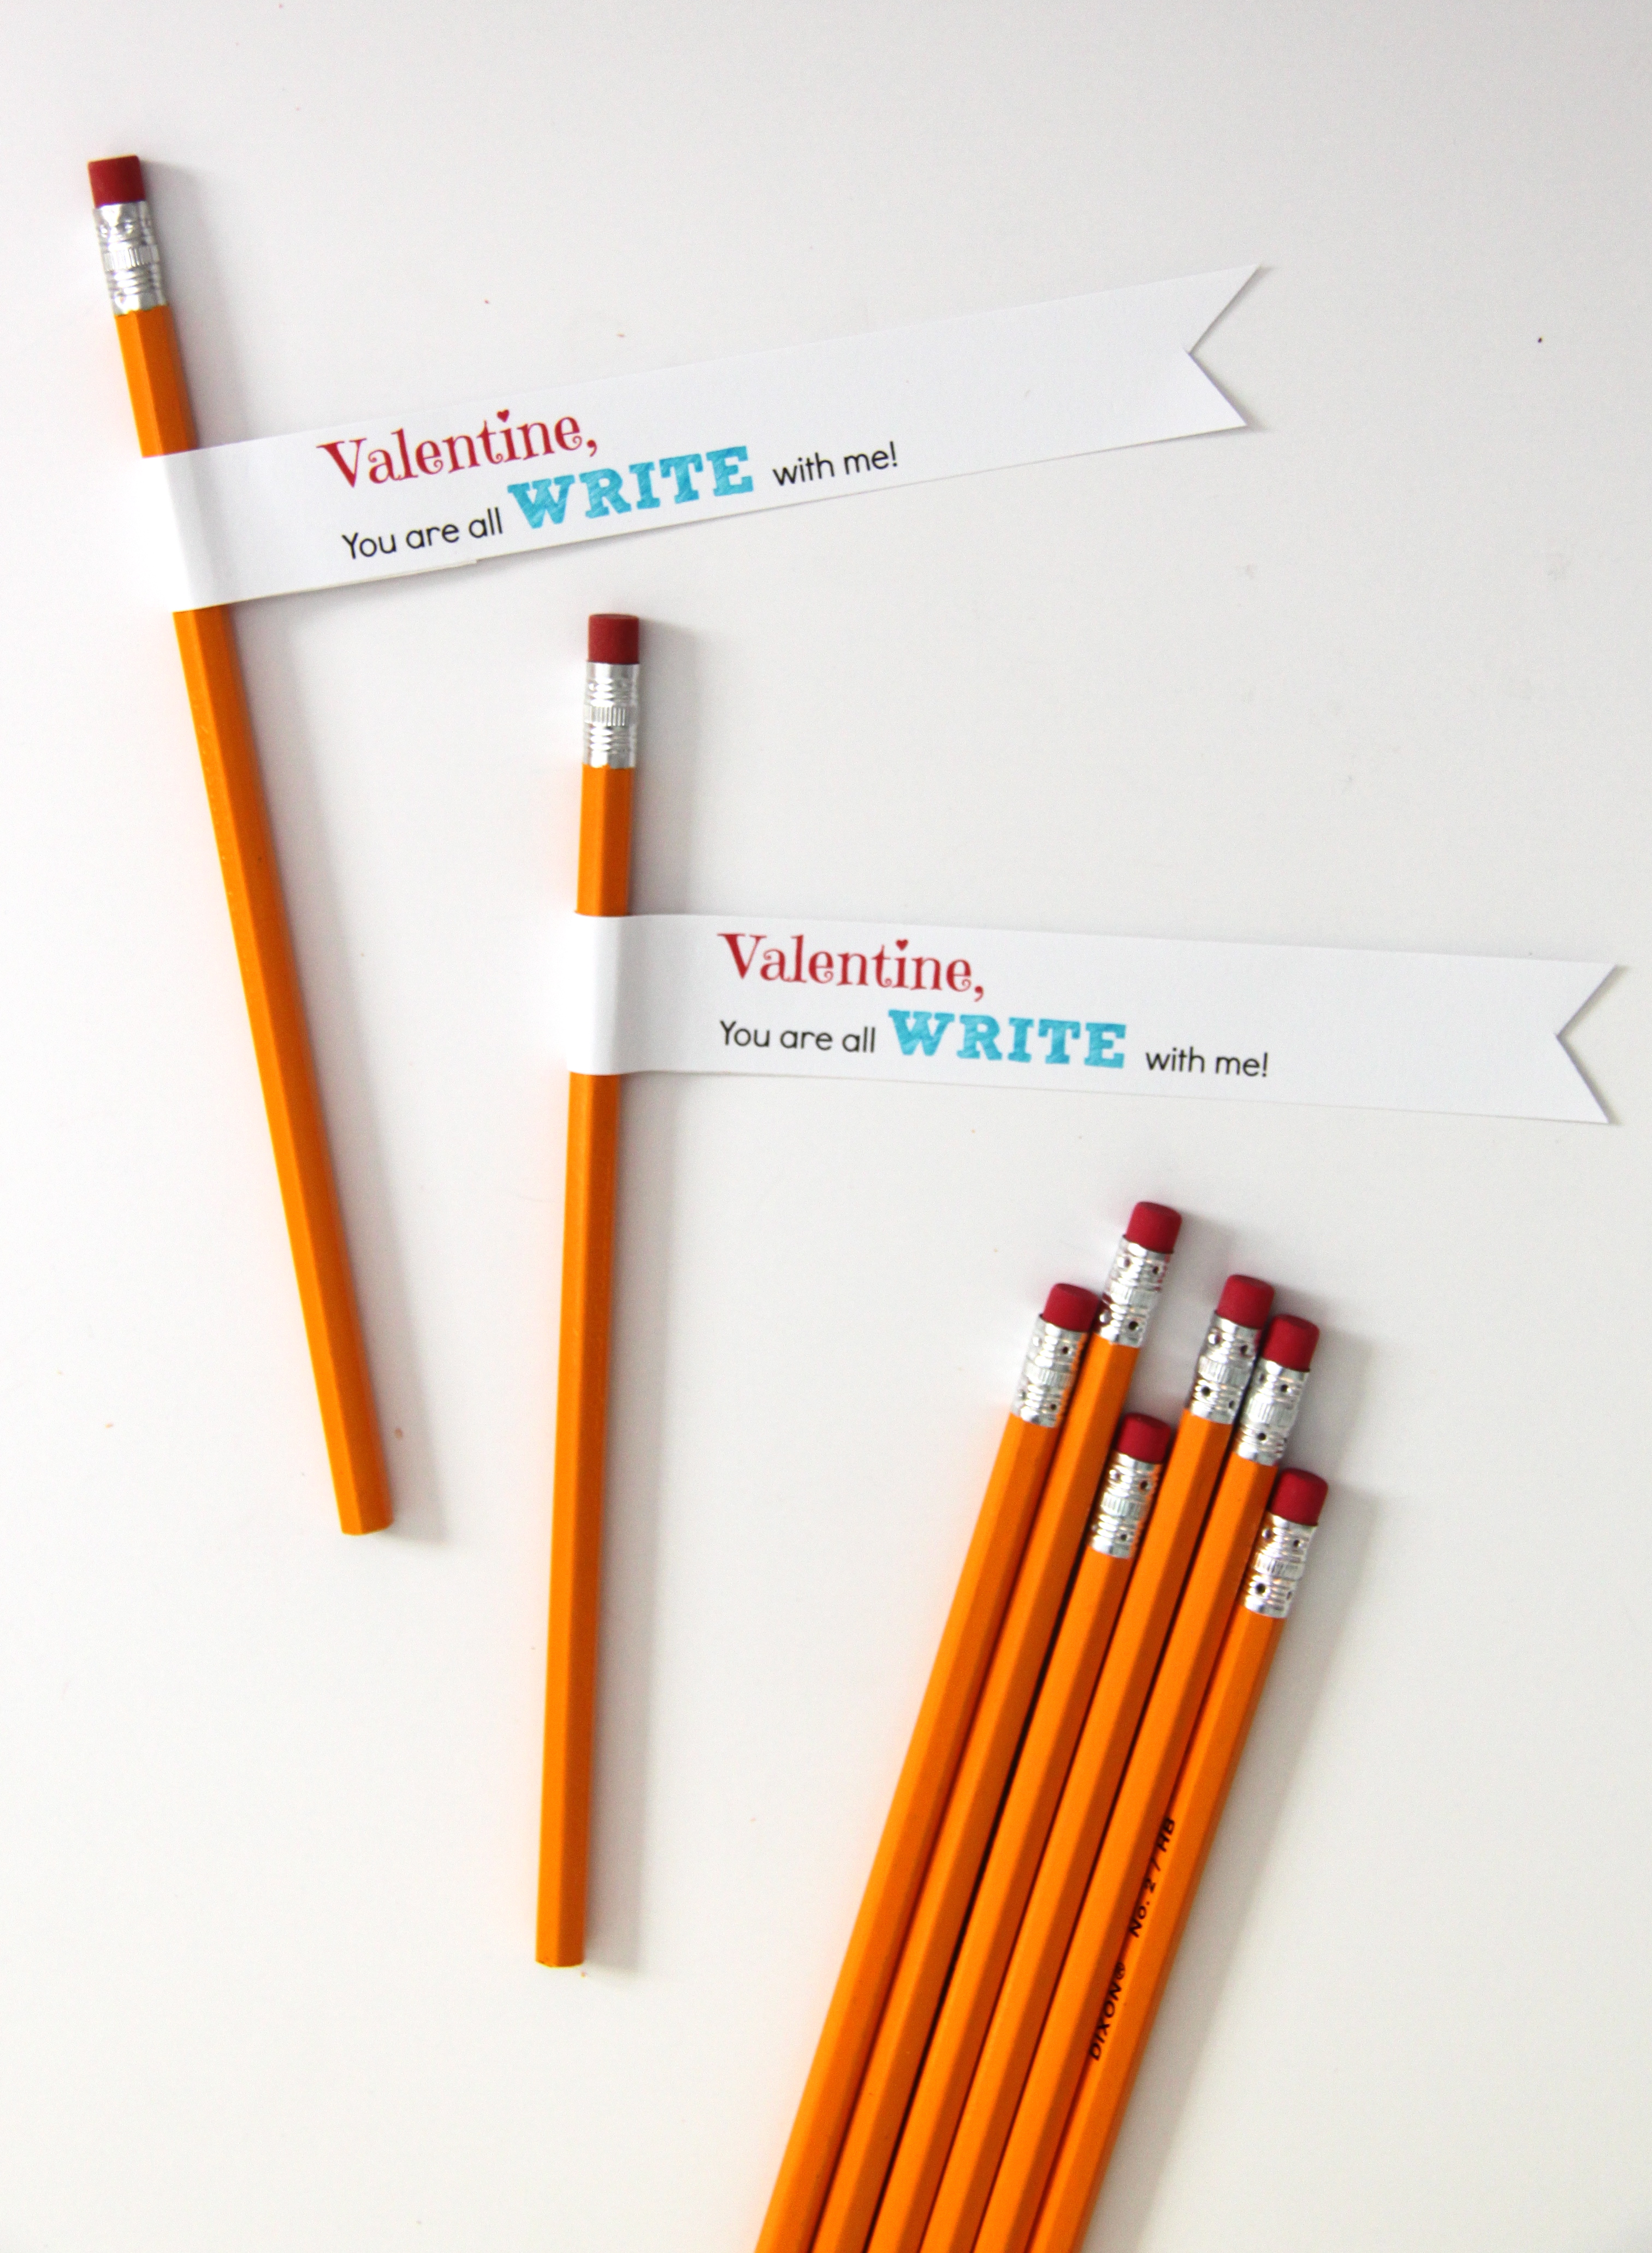 FREE Printable: Valentine, you are all WRITE with me - Smashed